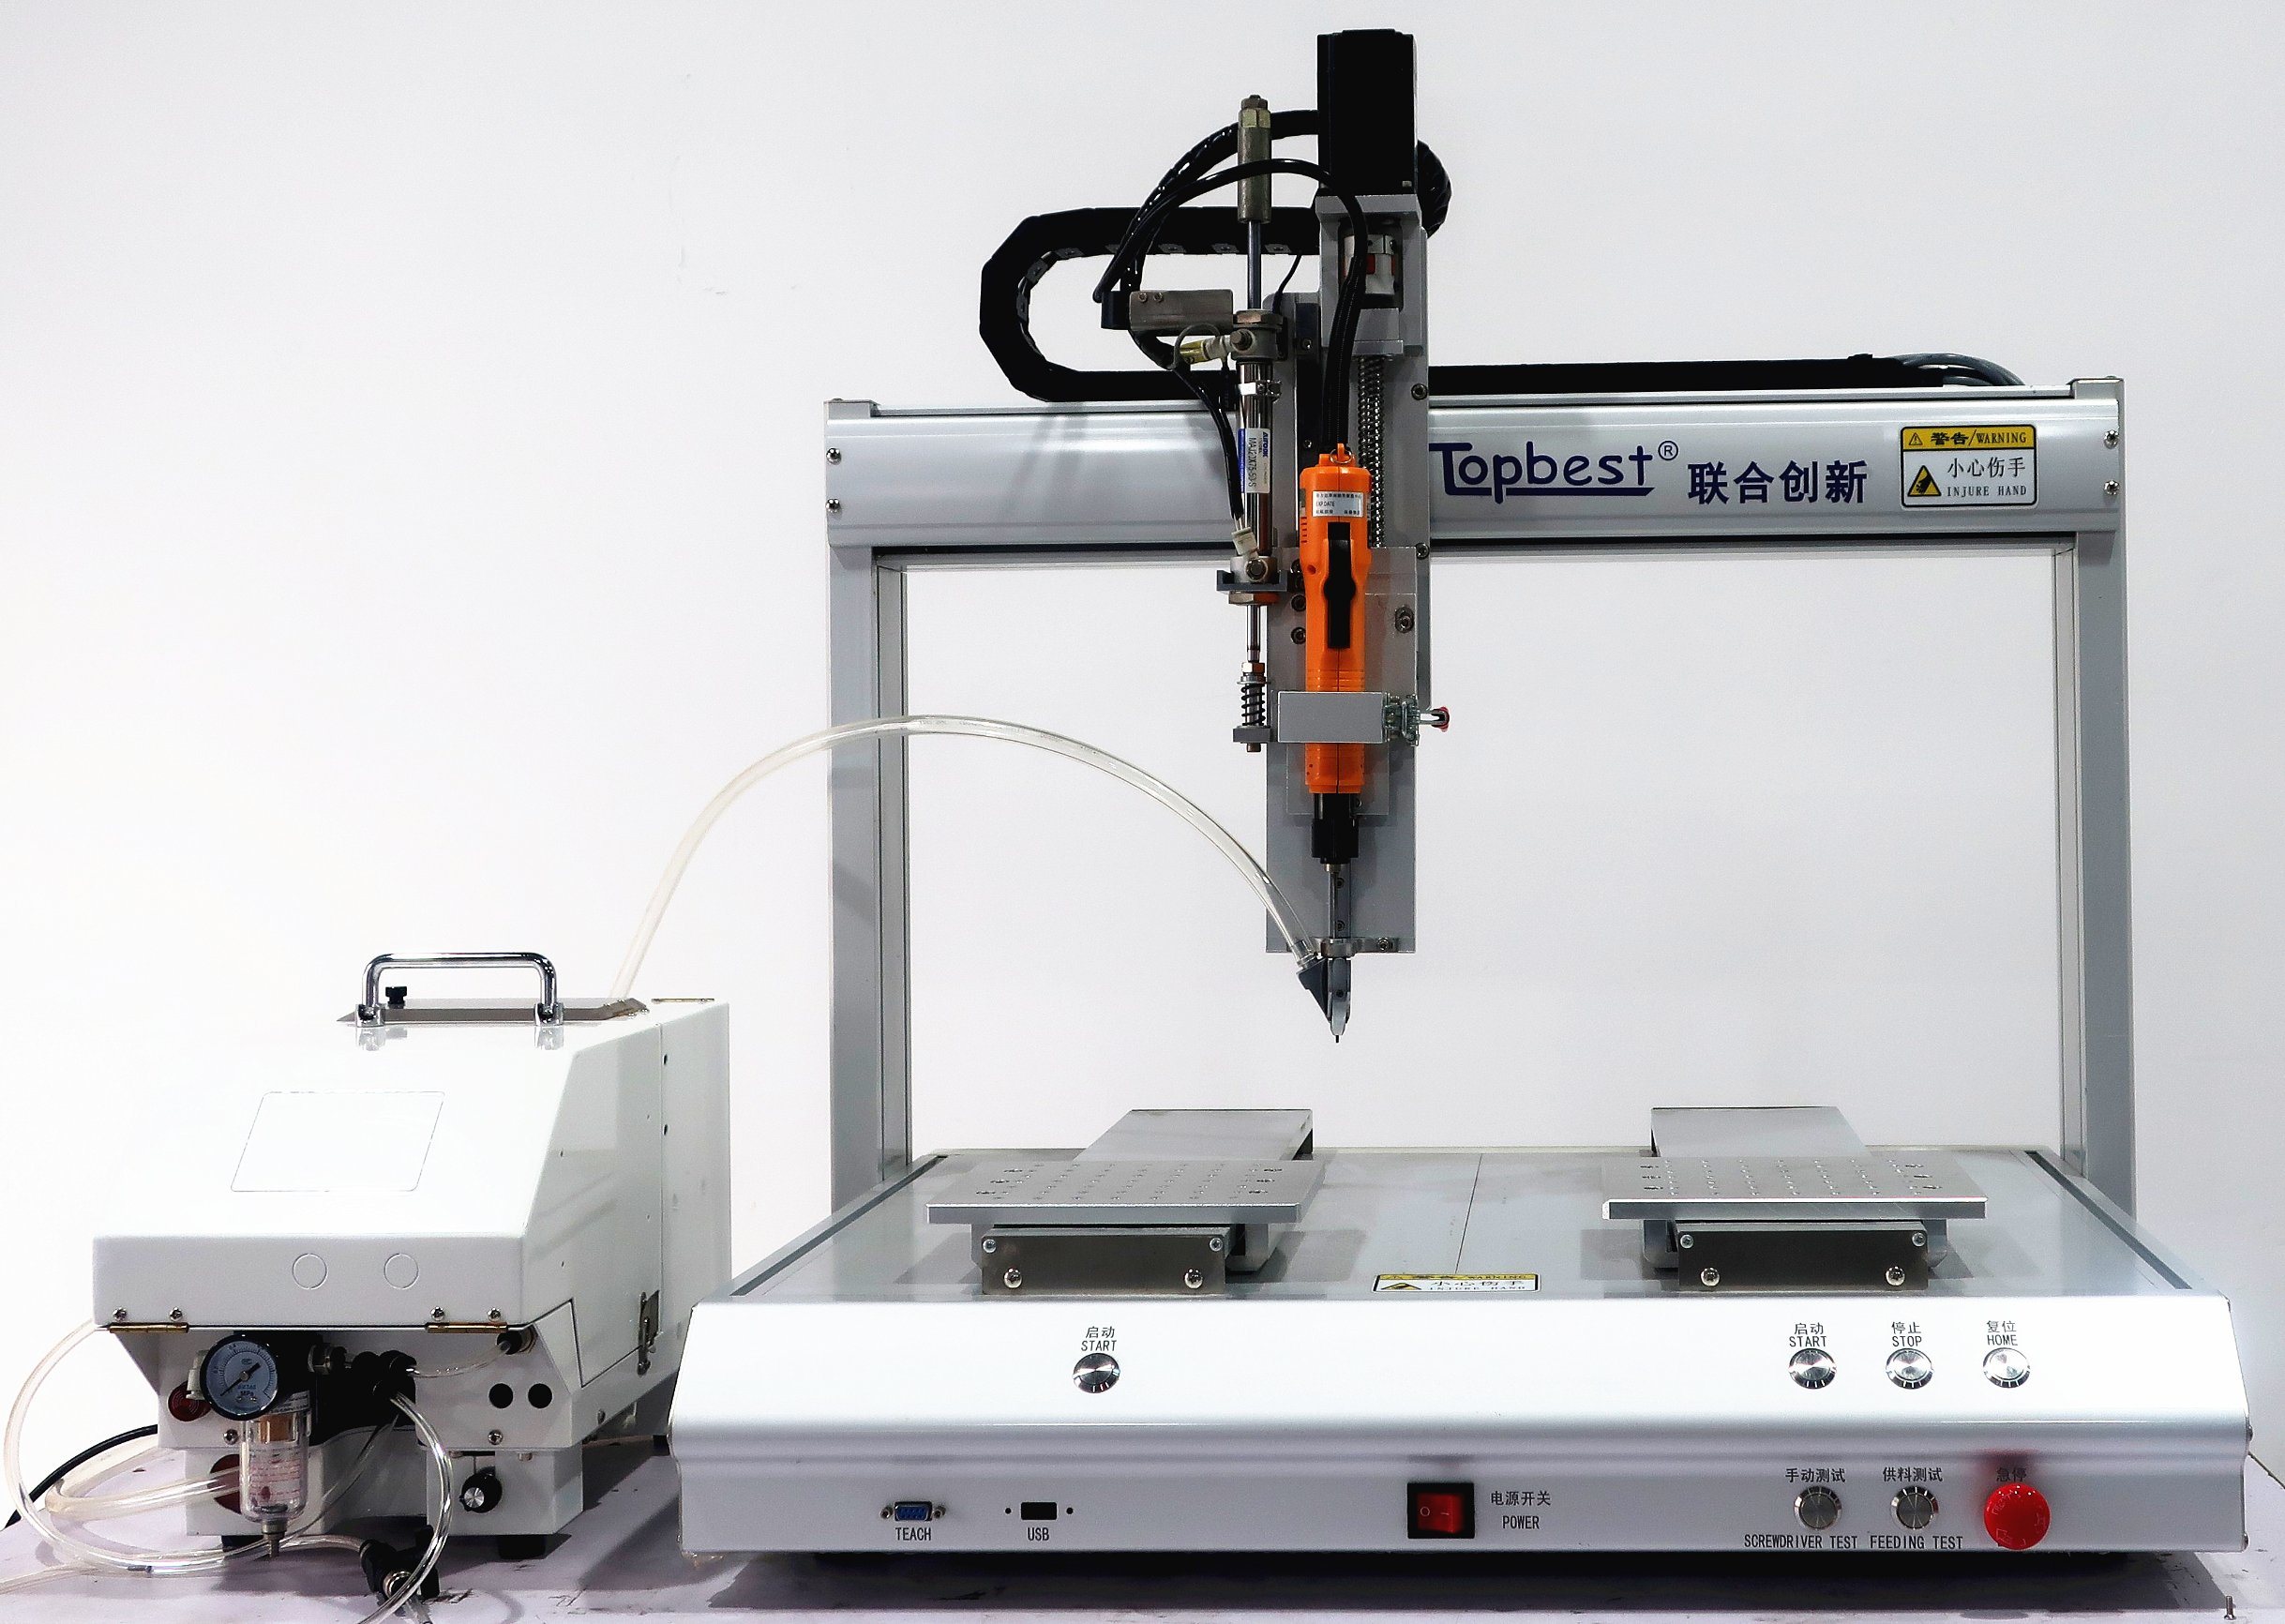 Why Do You Need to Invest in an Automatic Screw Locking Machine to Improve Your Work Efficiency?